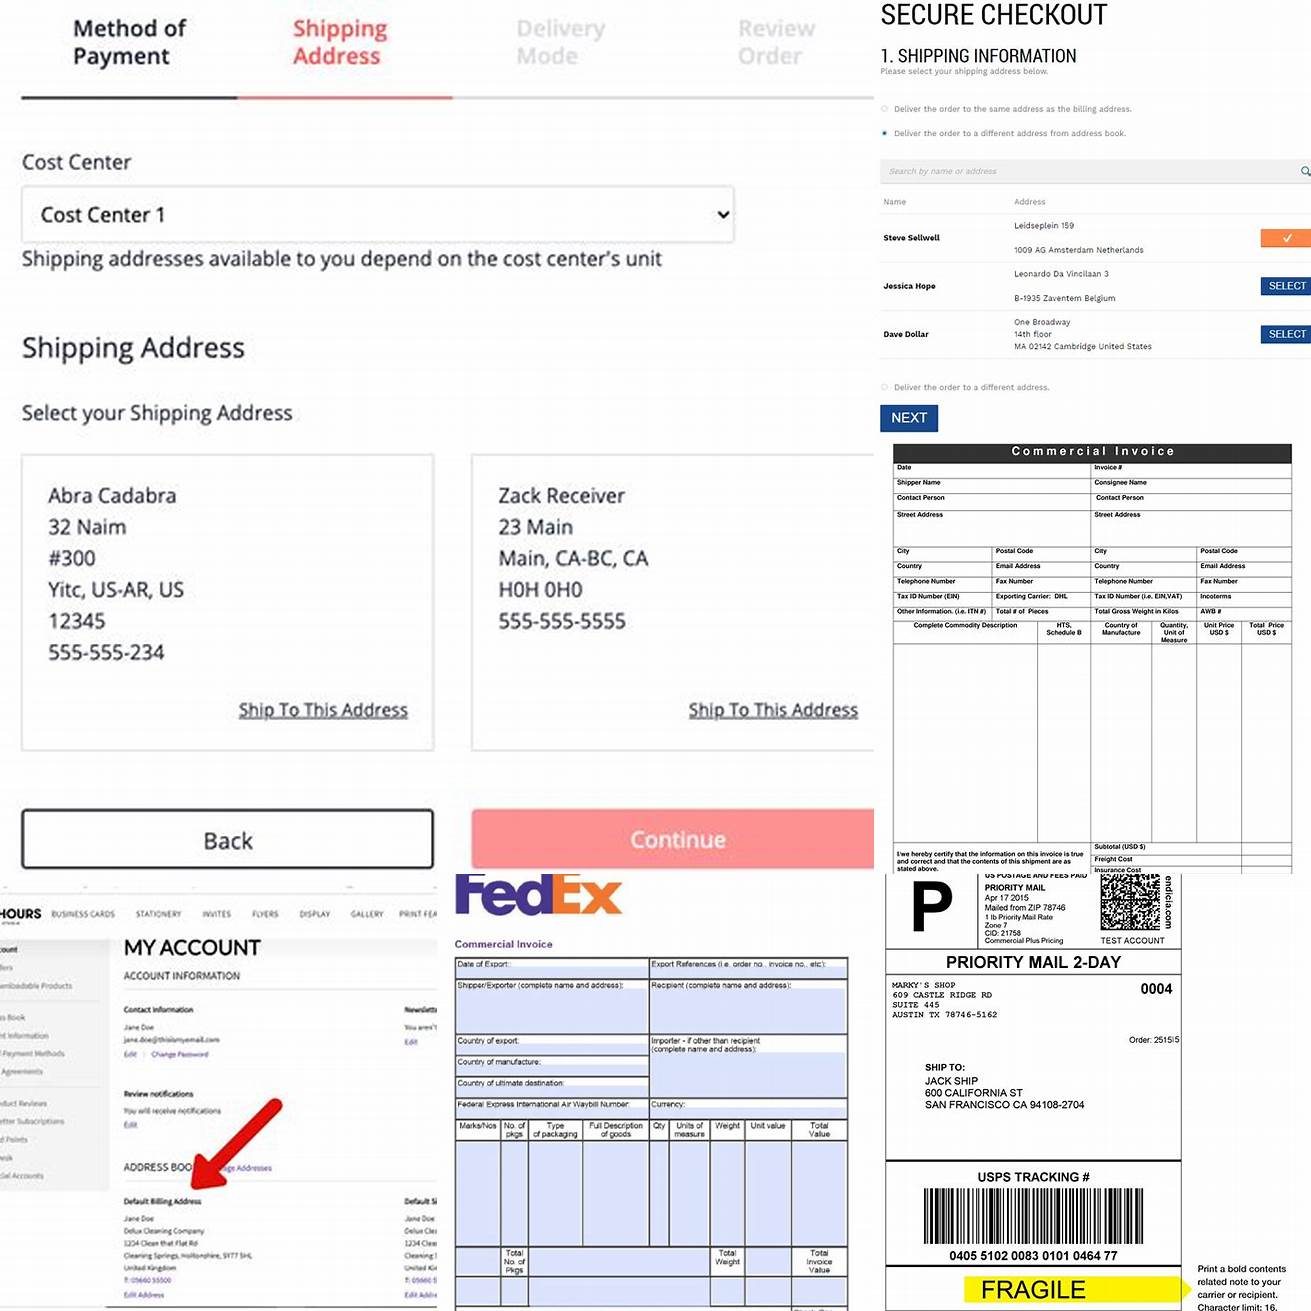 Fill in your shipping and billing information